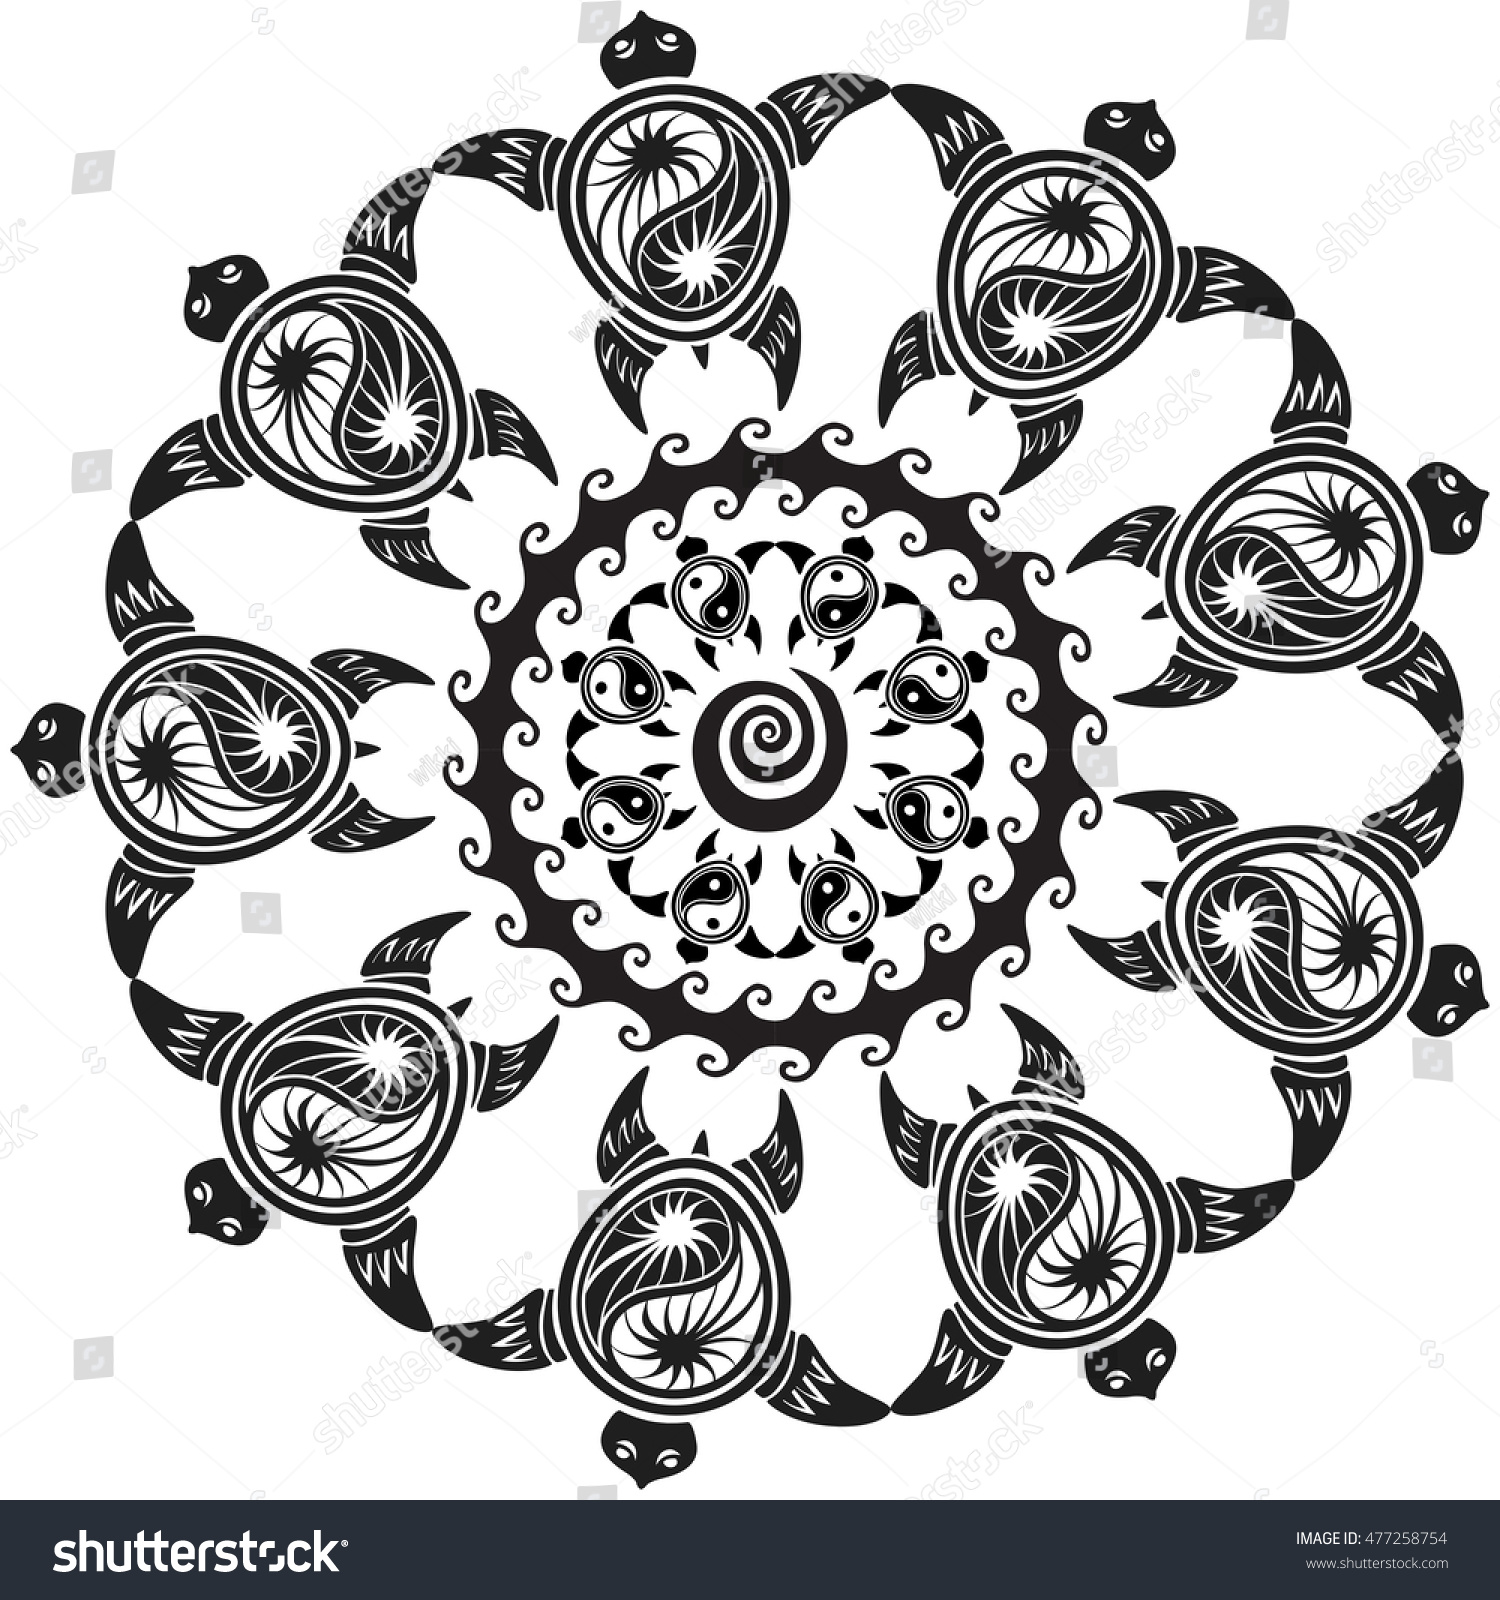 SVG of Round pattern with decorated turtles svg